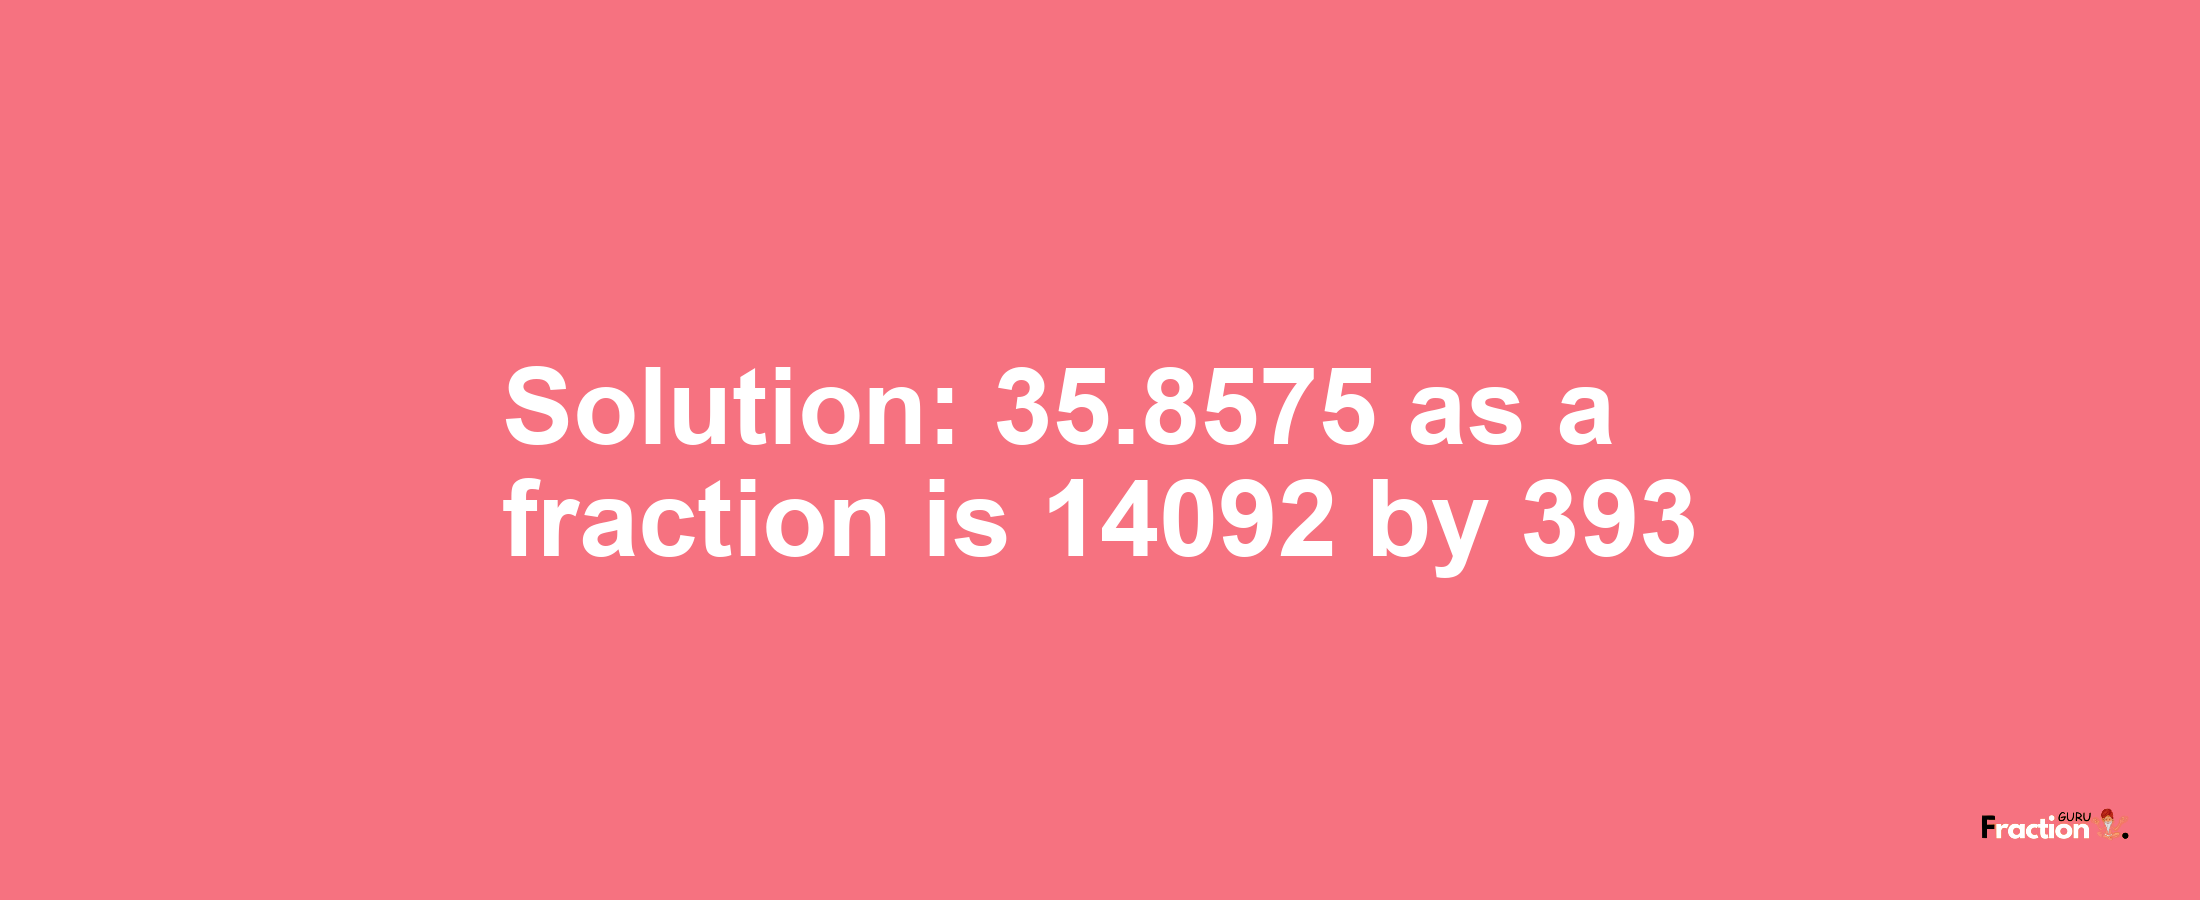 Solution:35.8575 as a fraction is 14092/393